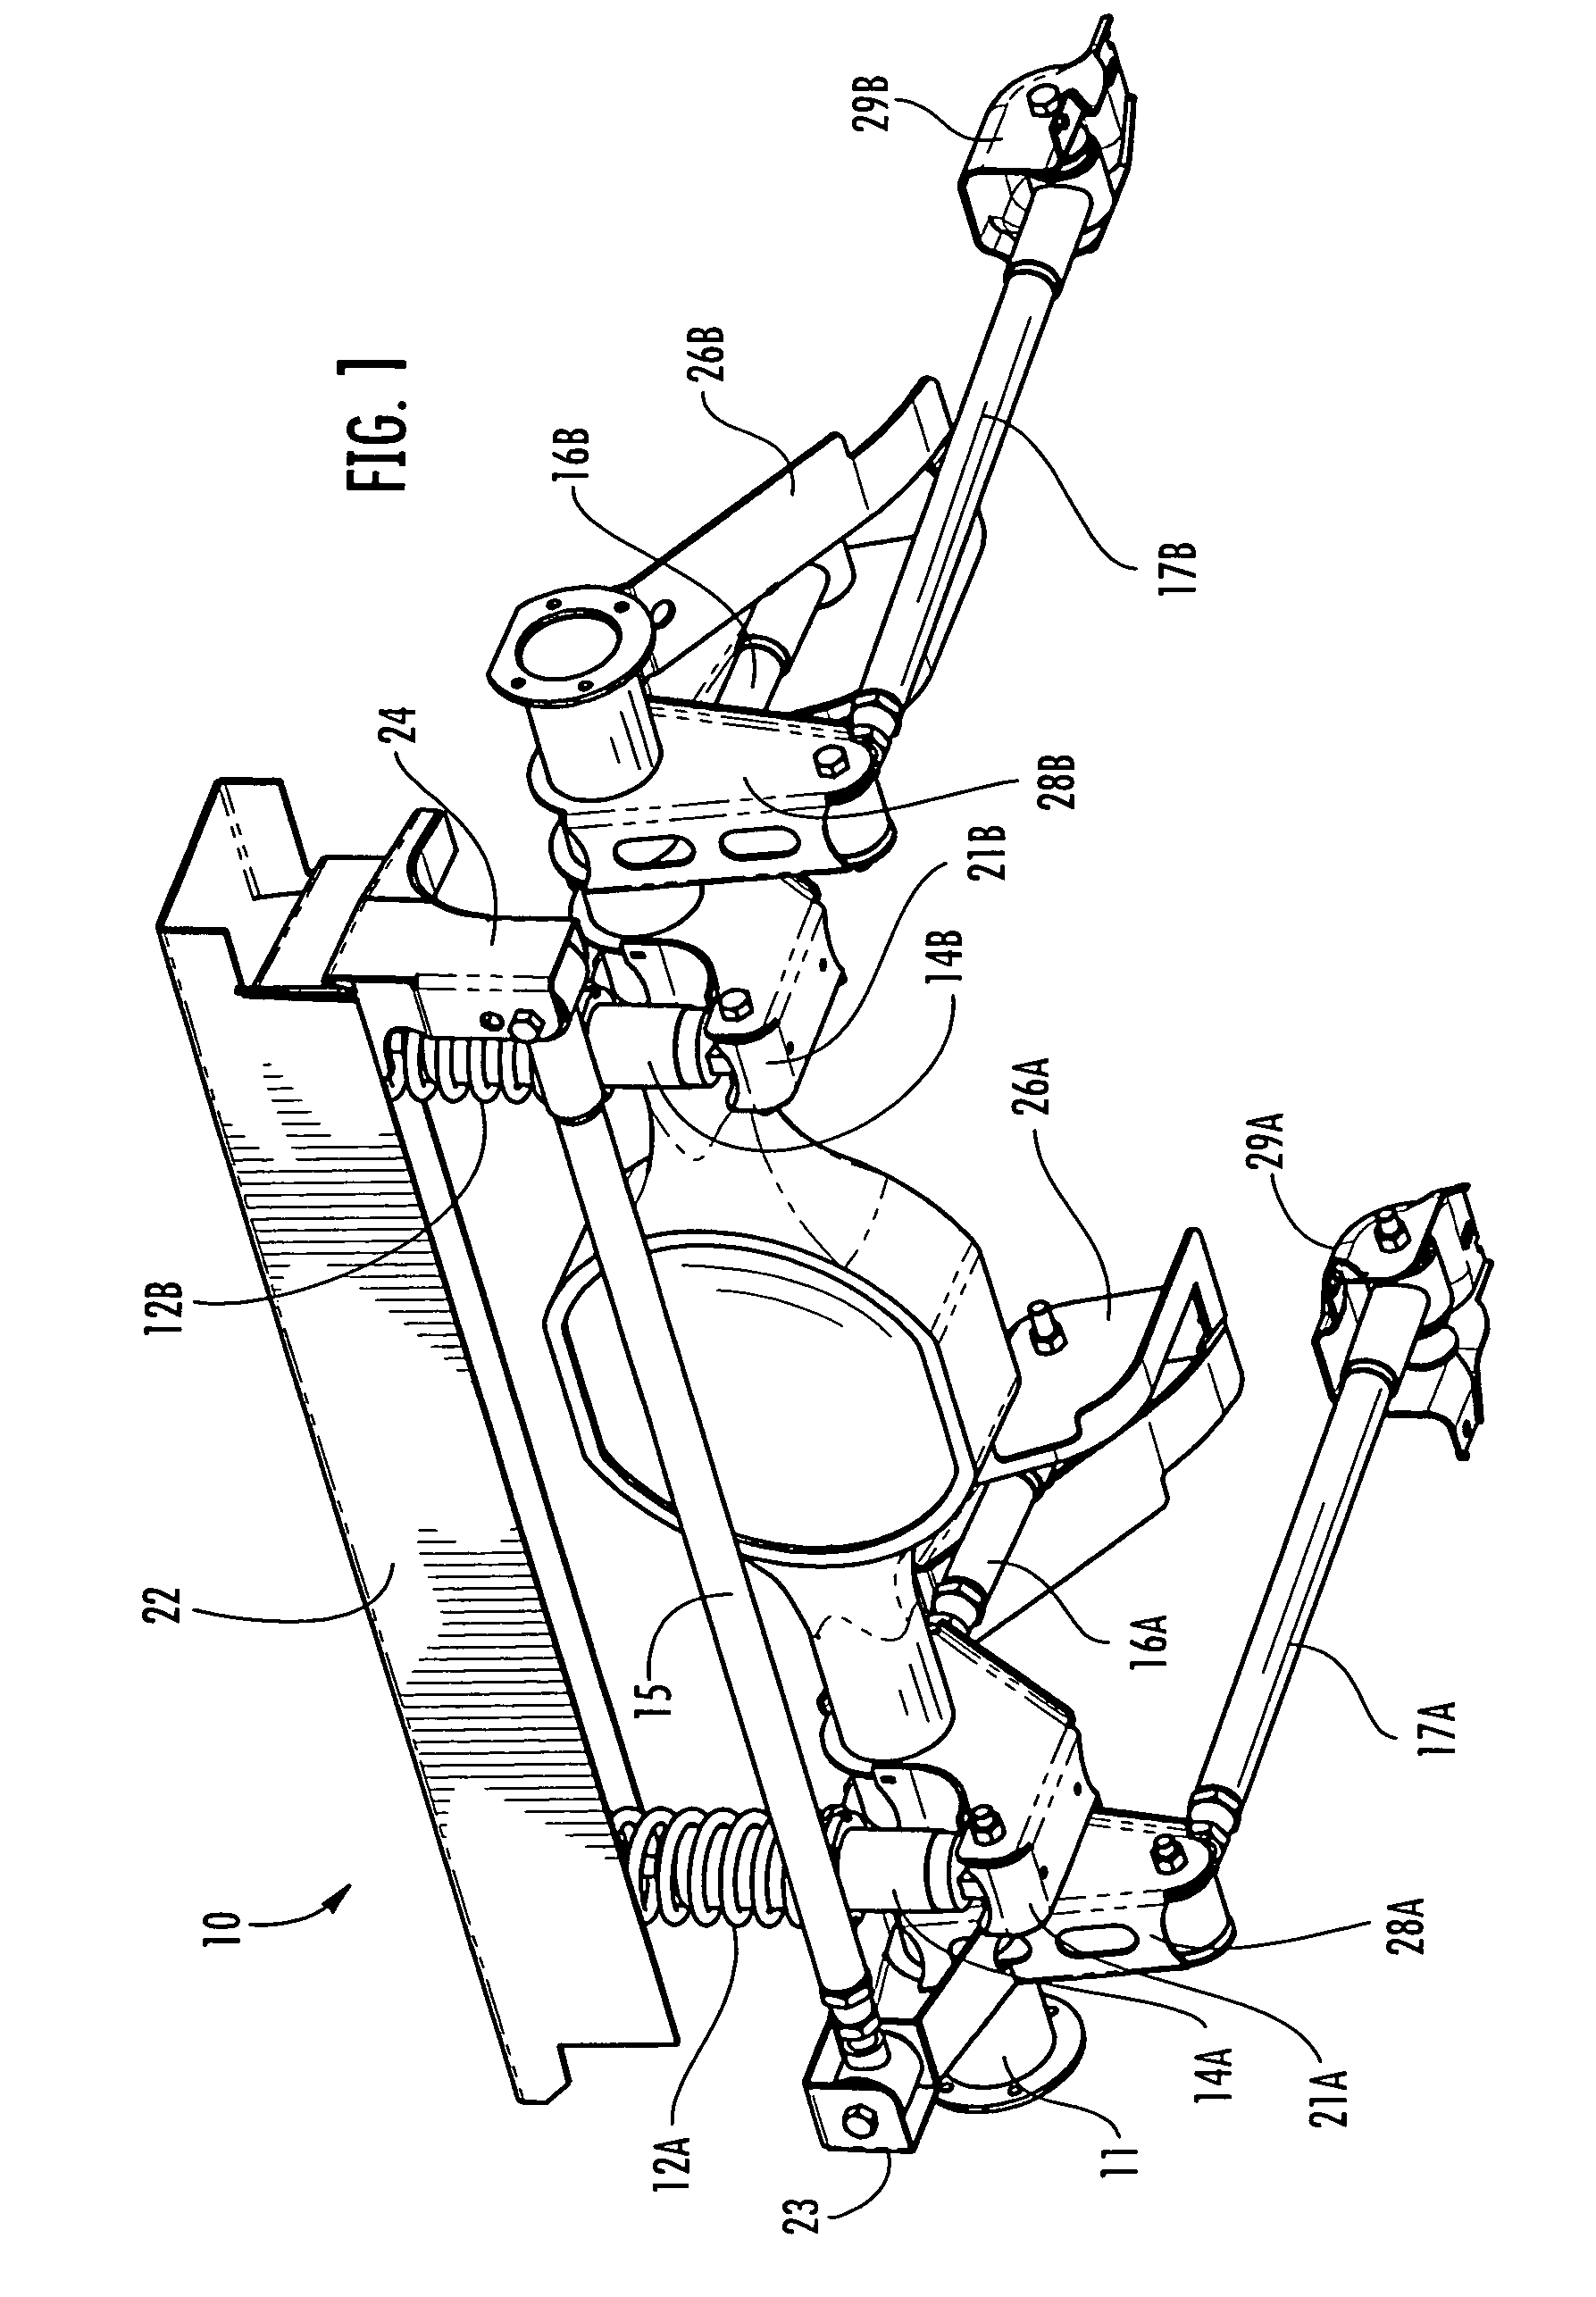 Vehicle suspension system incorporating swivel link assembly